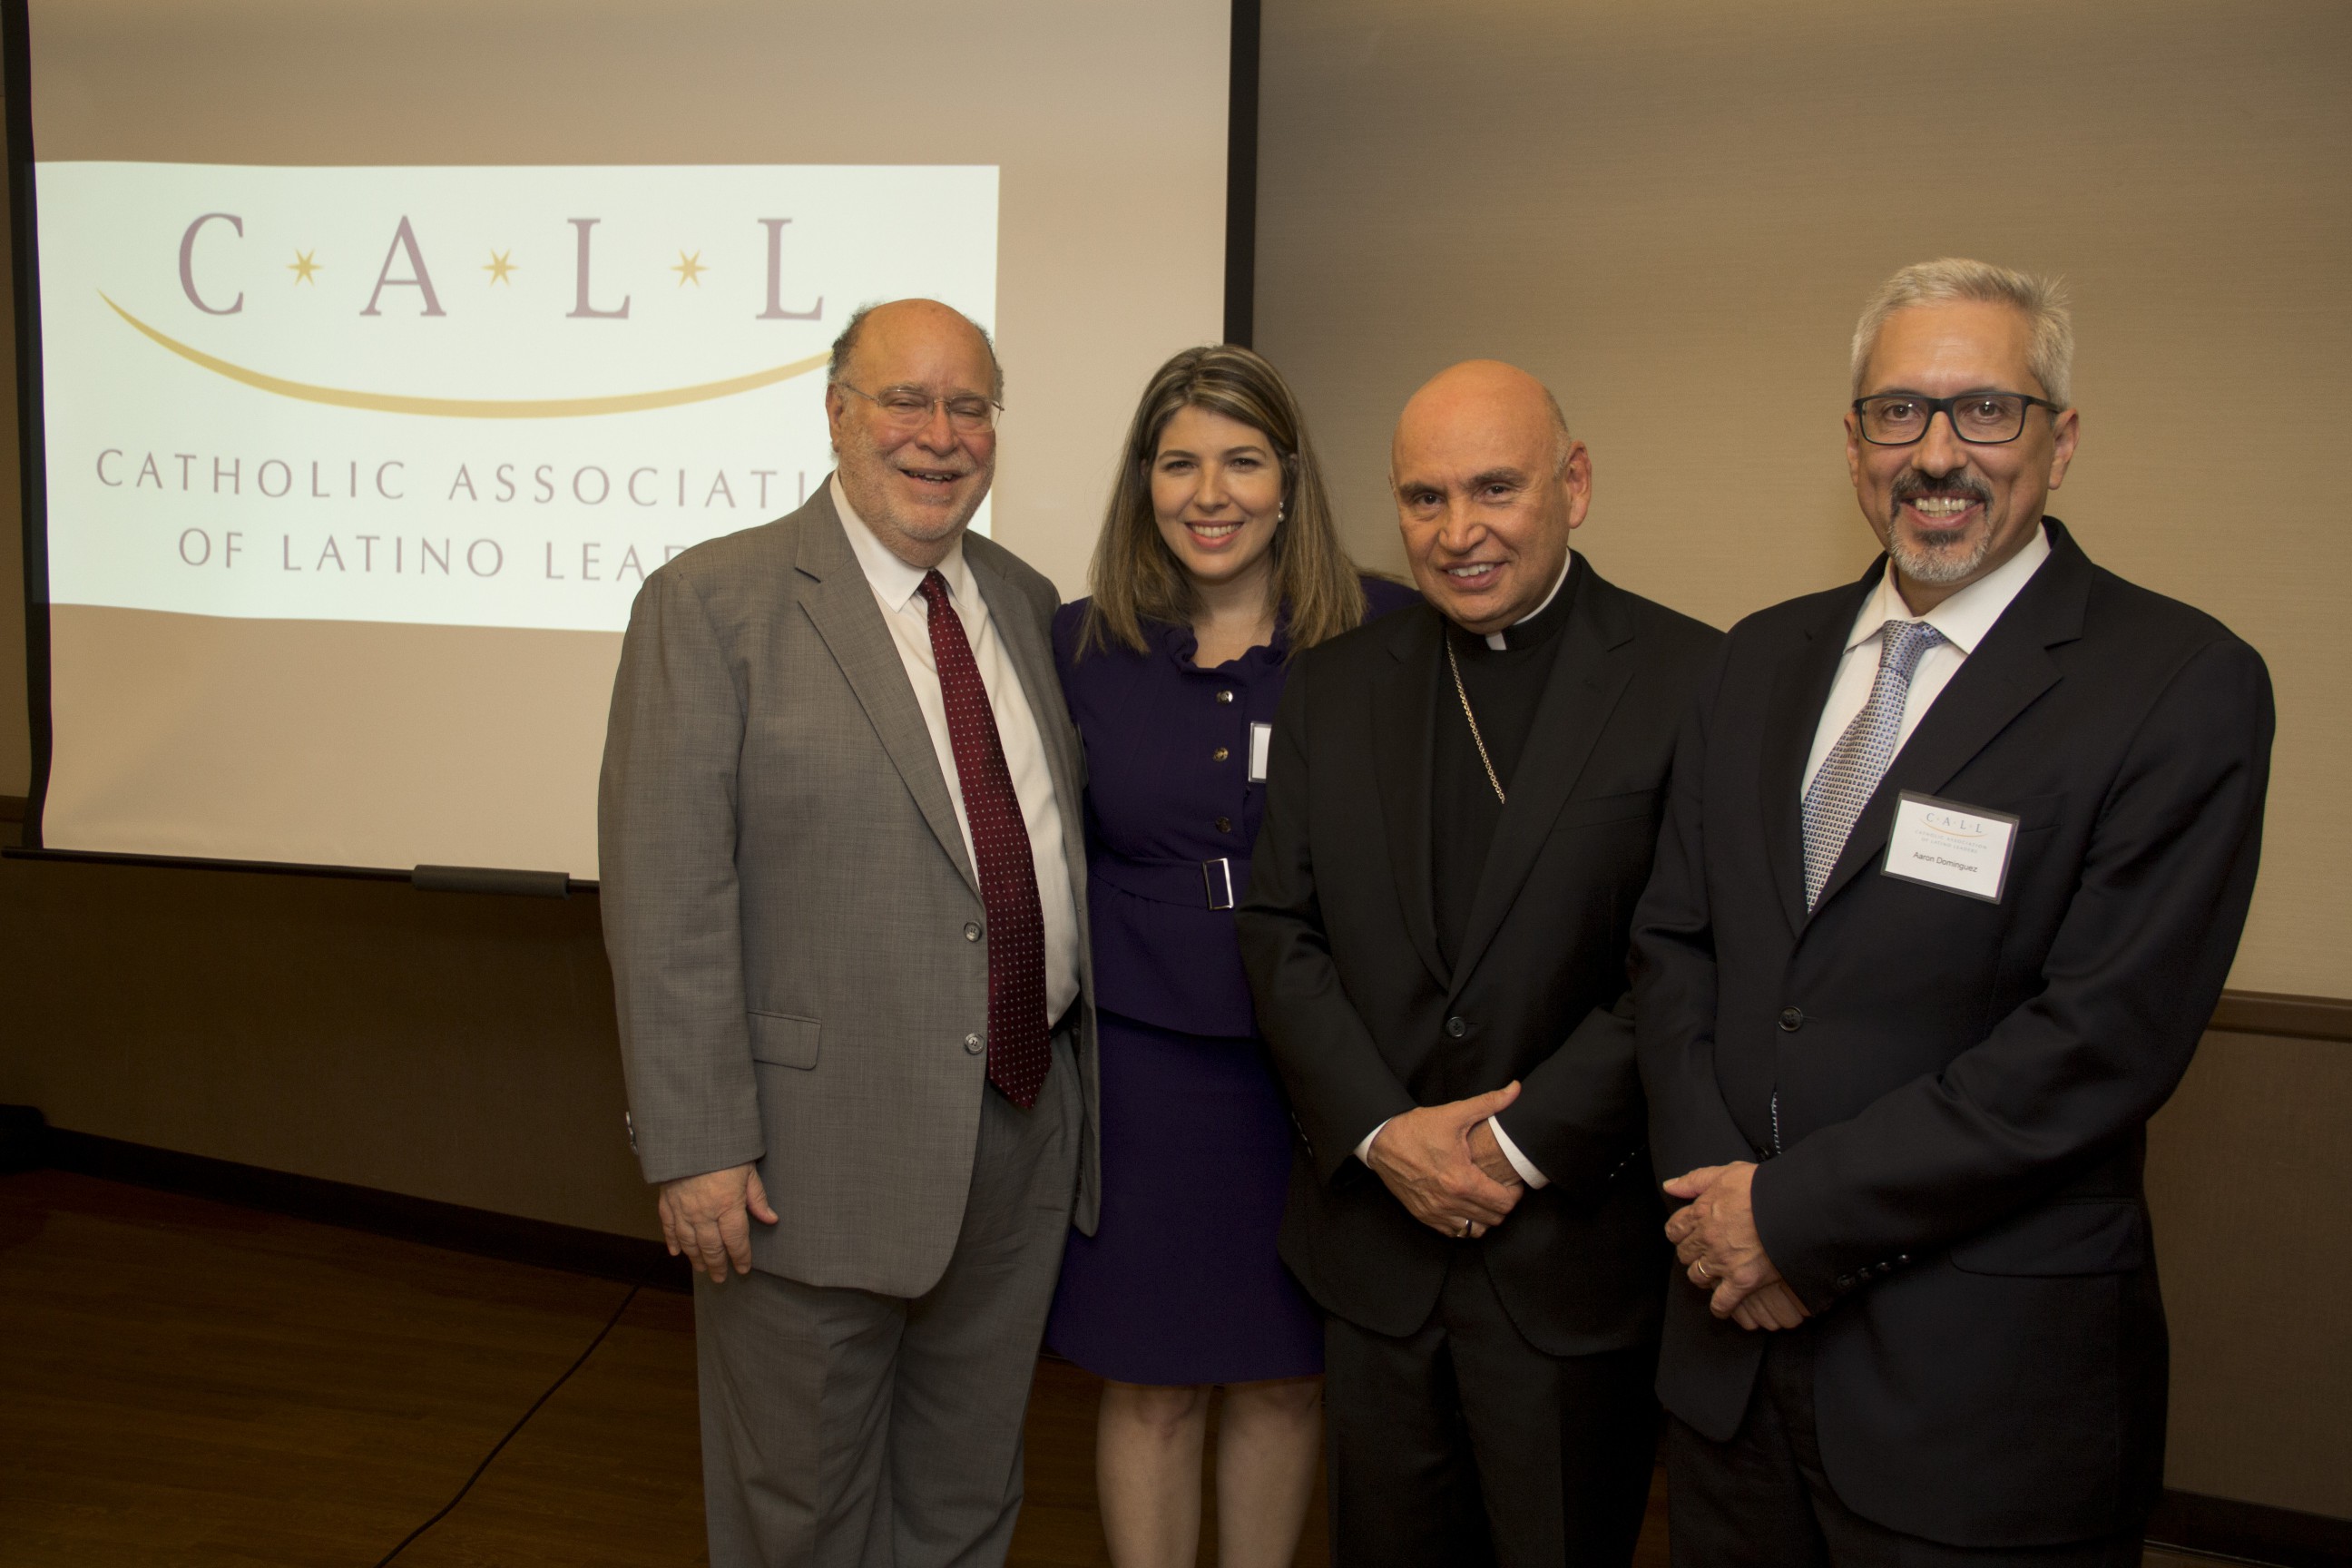 Busch School of Business supports creation of the Catholic Association for Latino Leaders DC Chapter